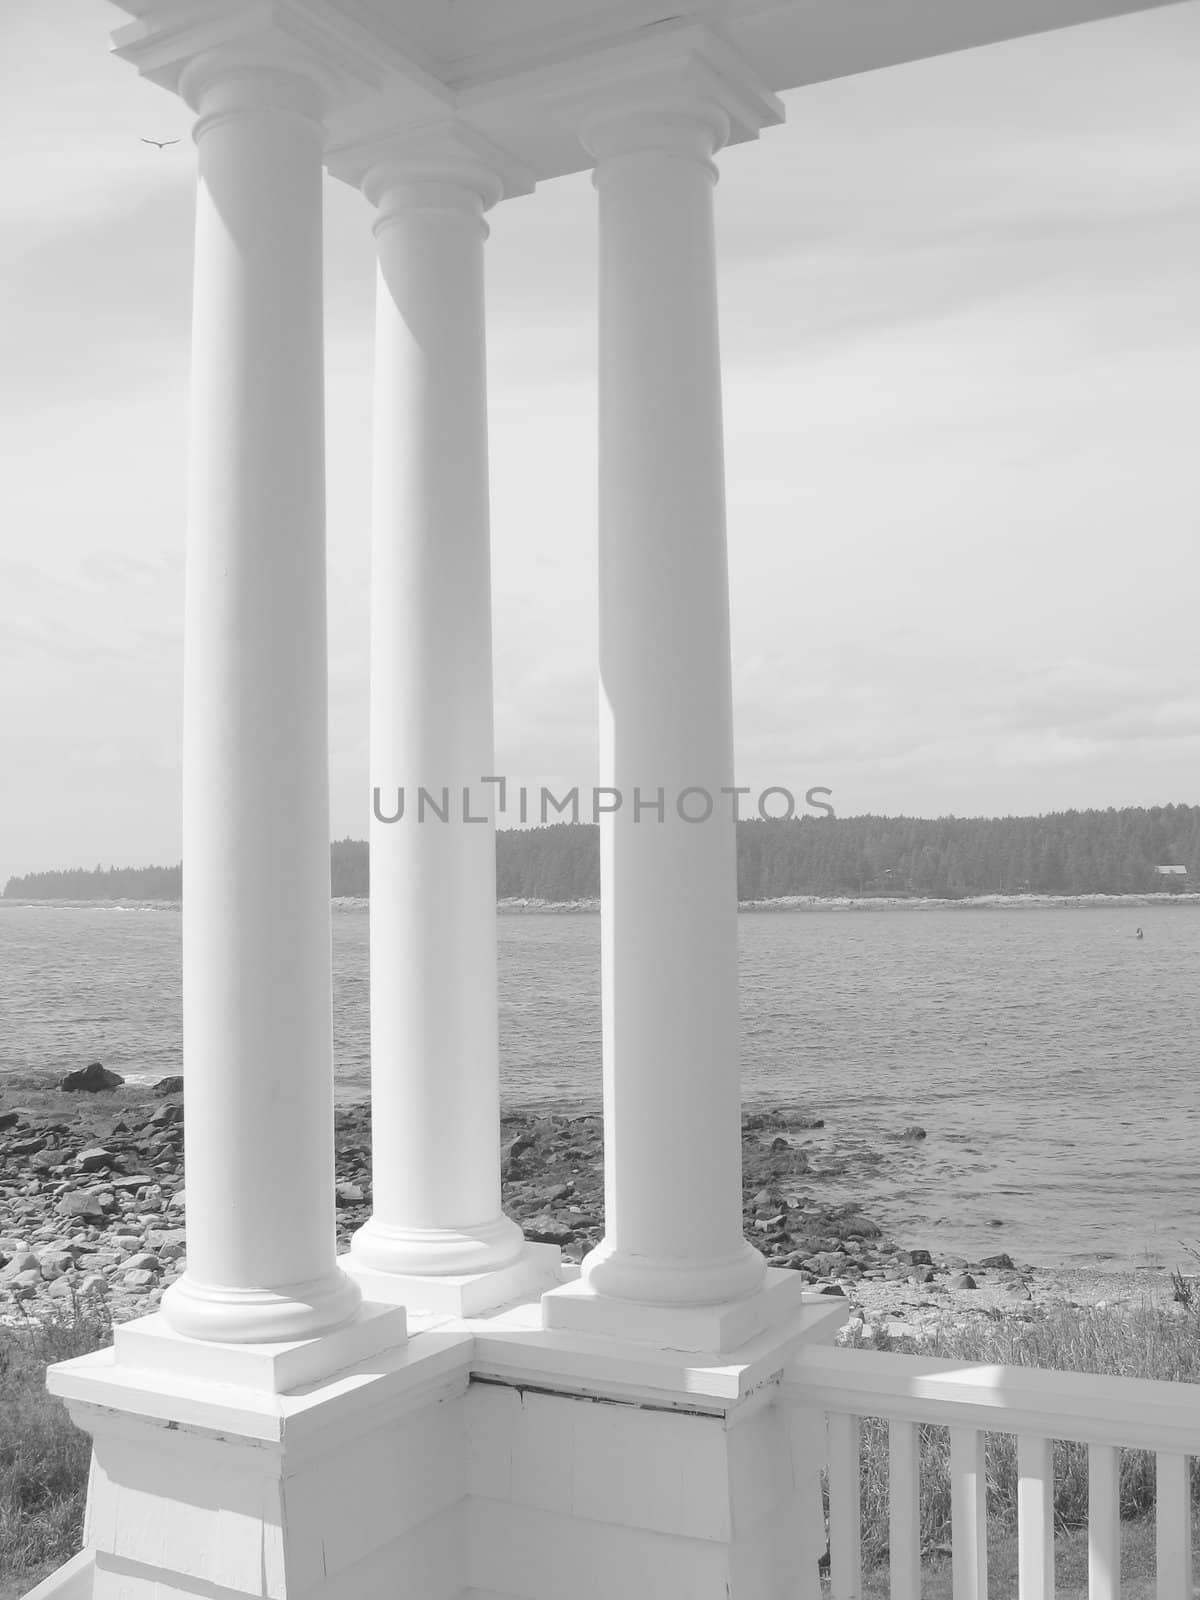 Three 19th century architectural columns at the ocean's edge, in black and white